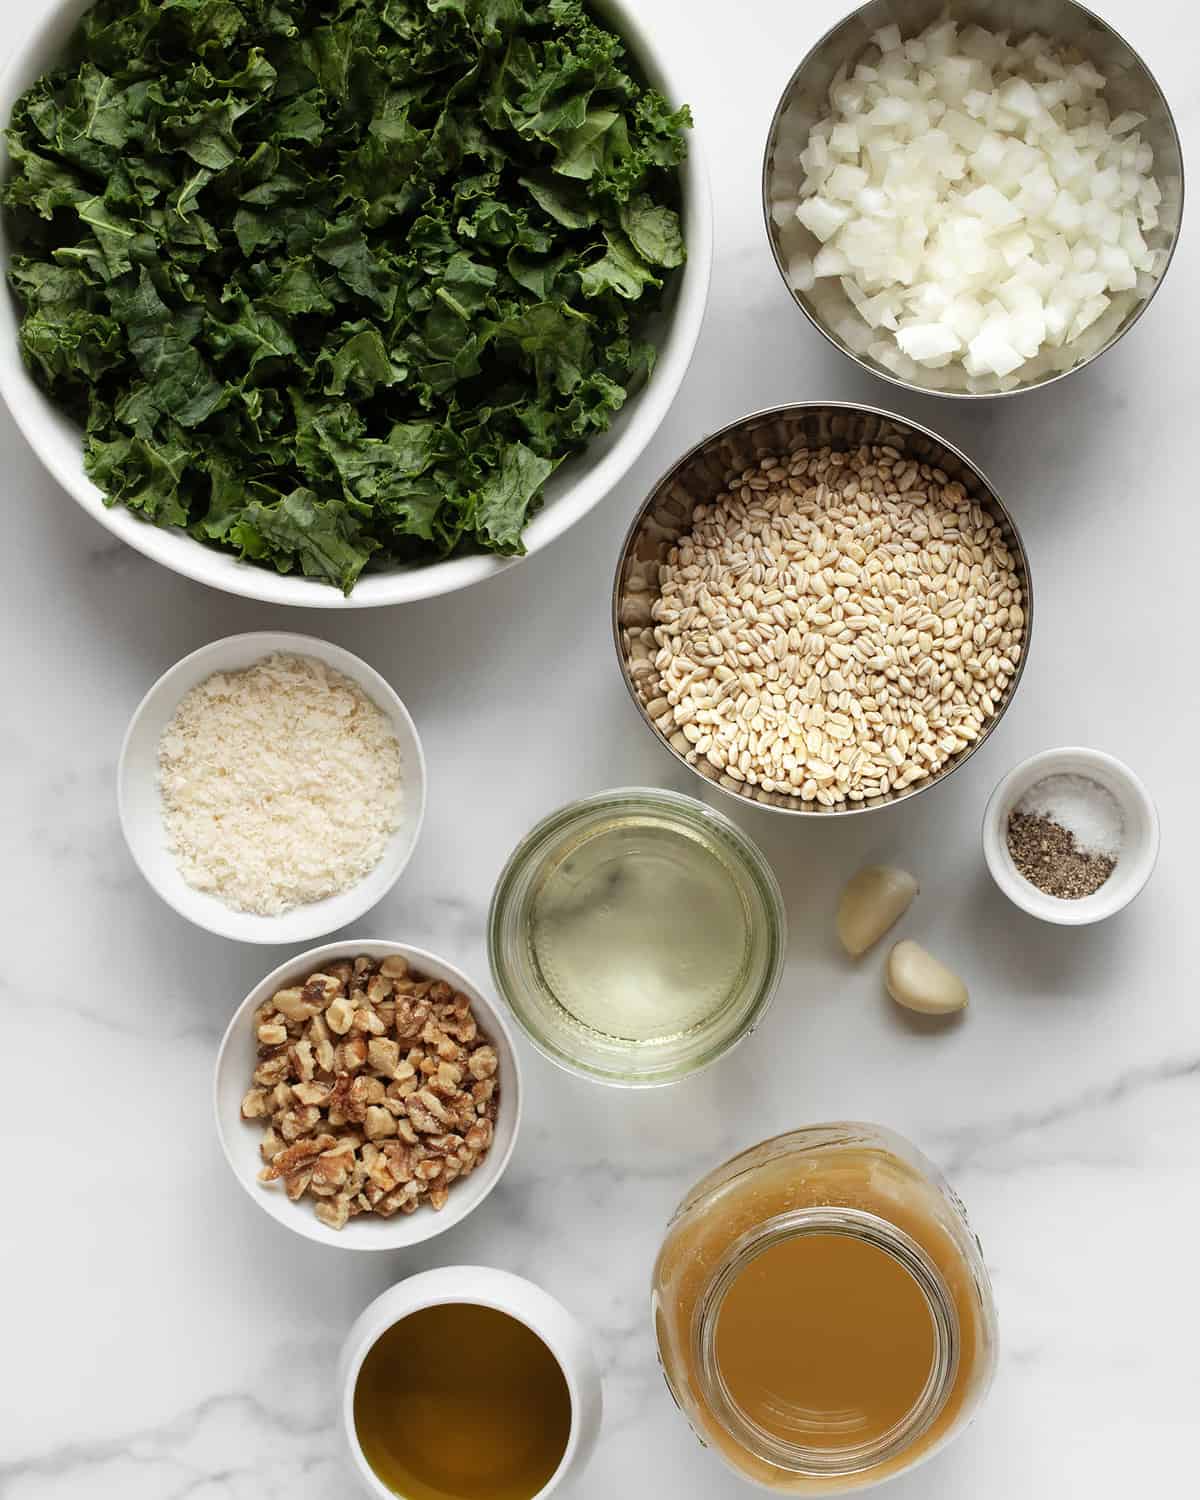 Ingredients including kale, pearl barley, onions, olive oil, Parmesan, garlic, walnuts, white wine, salt and pepper.